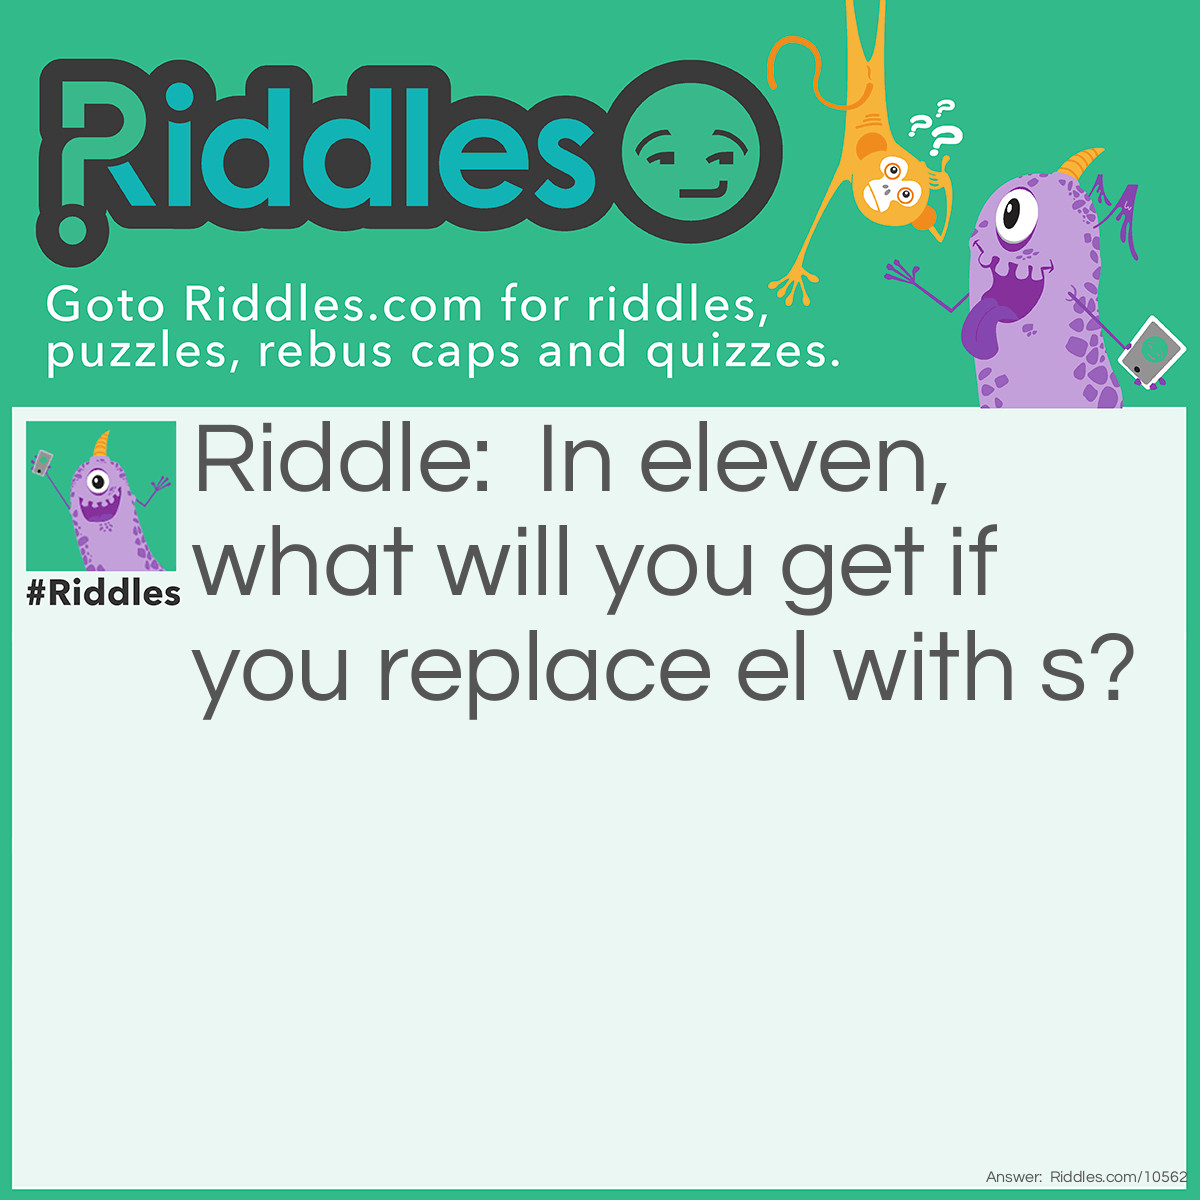 Riddle: In eleven, what will you get if you replace el with s? Answer: Seven. el = s